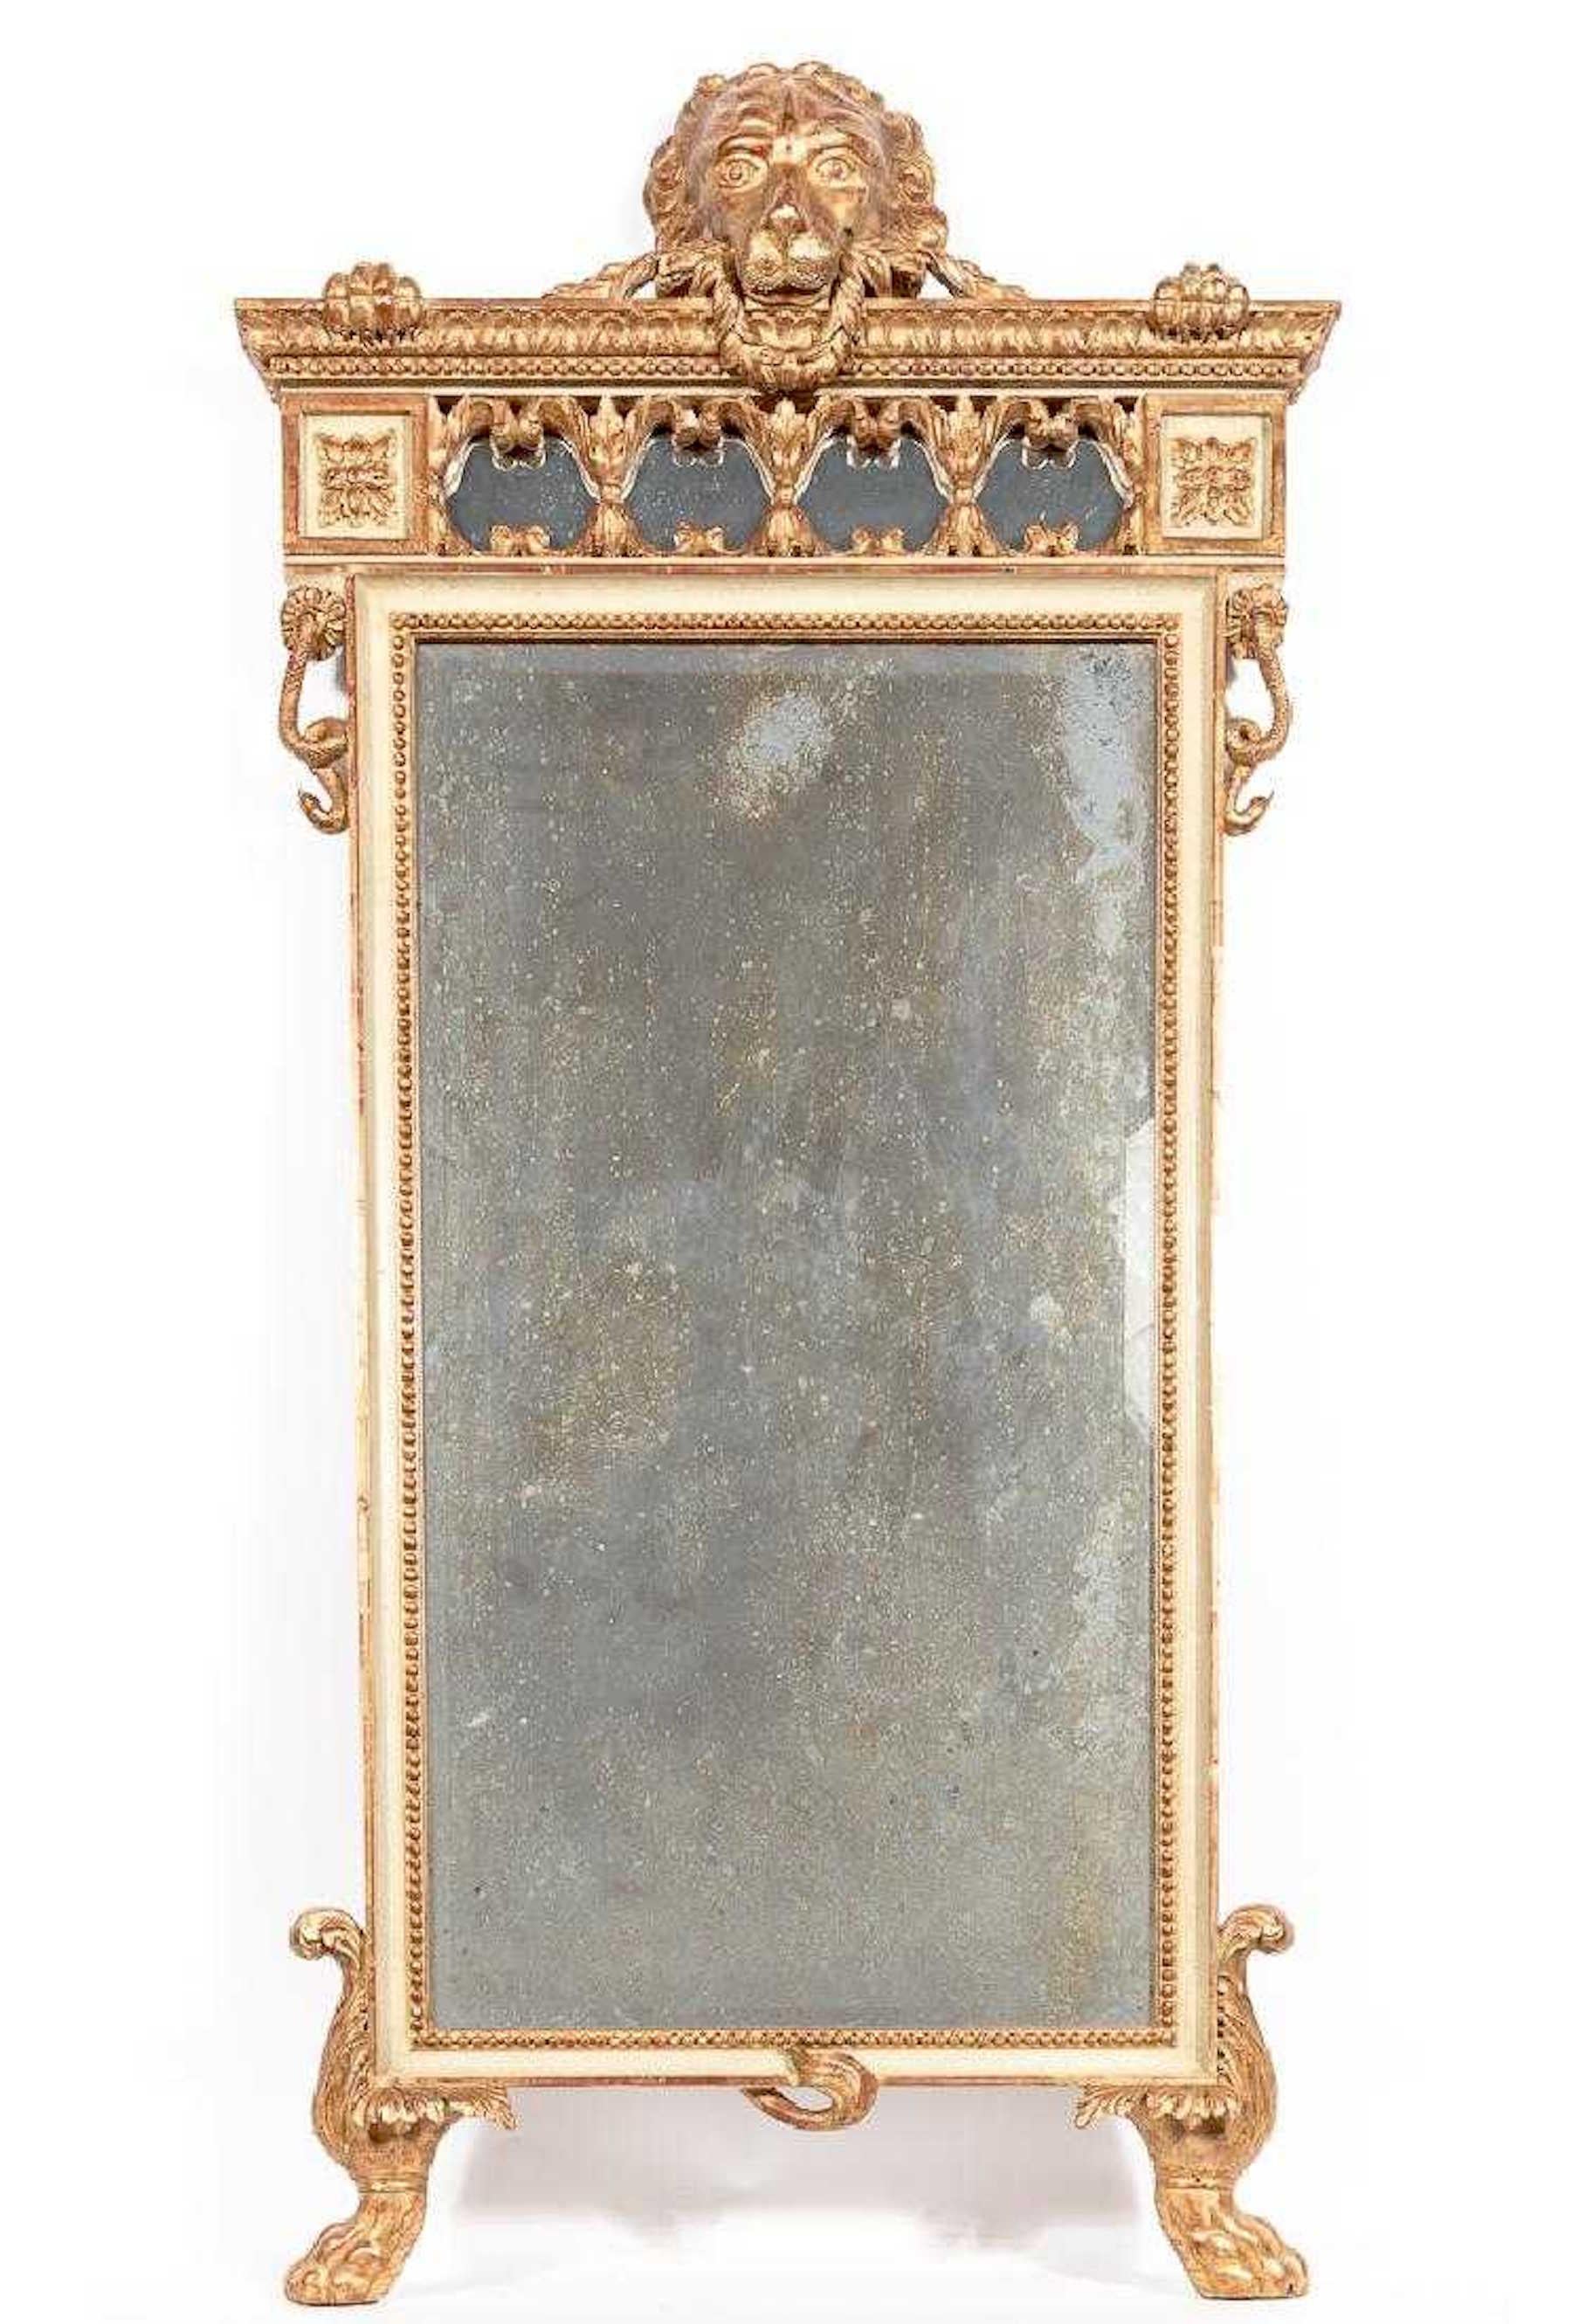 18th century Italian giltwood neoclassic standing lion motif mirror, whimsically designed with a standing lion appearing to hold the water giltwood and parcel gilt frame holding the antique beveled mirror plate.